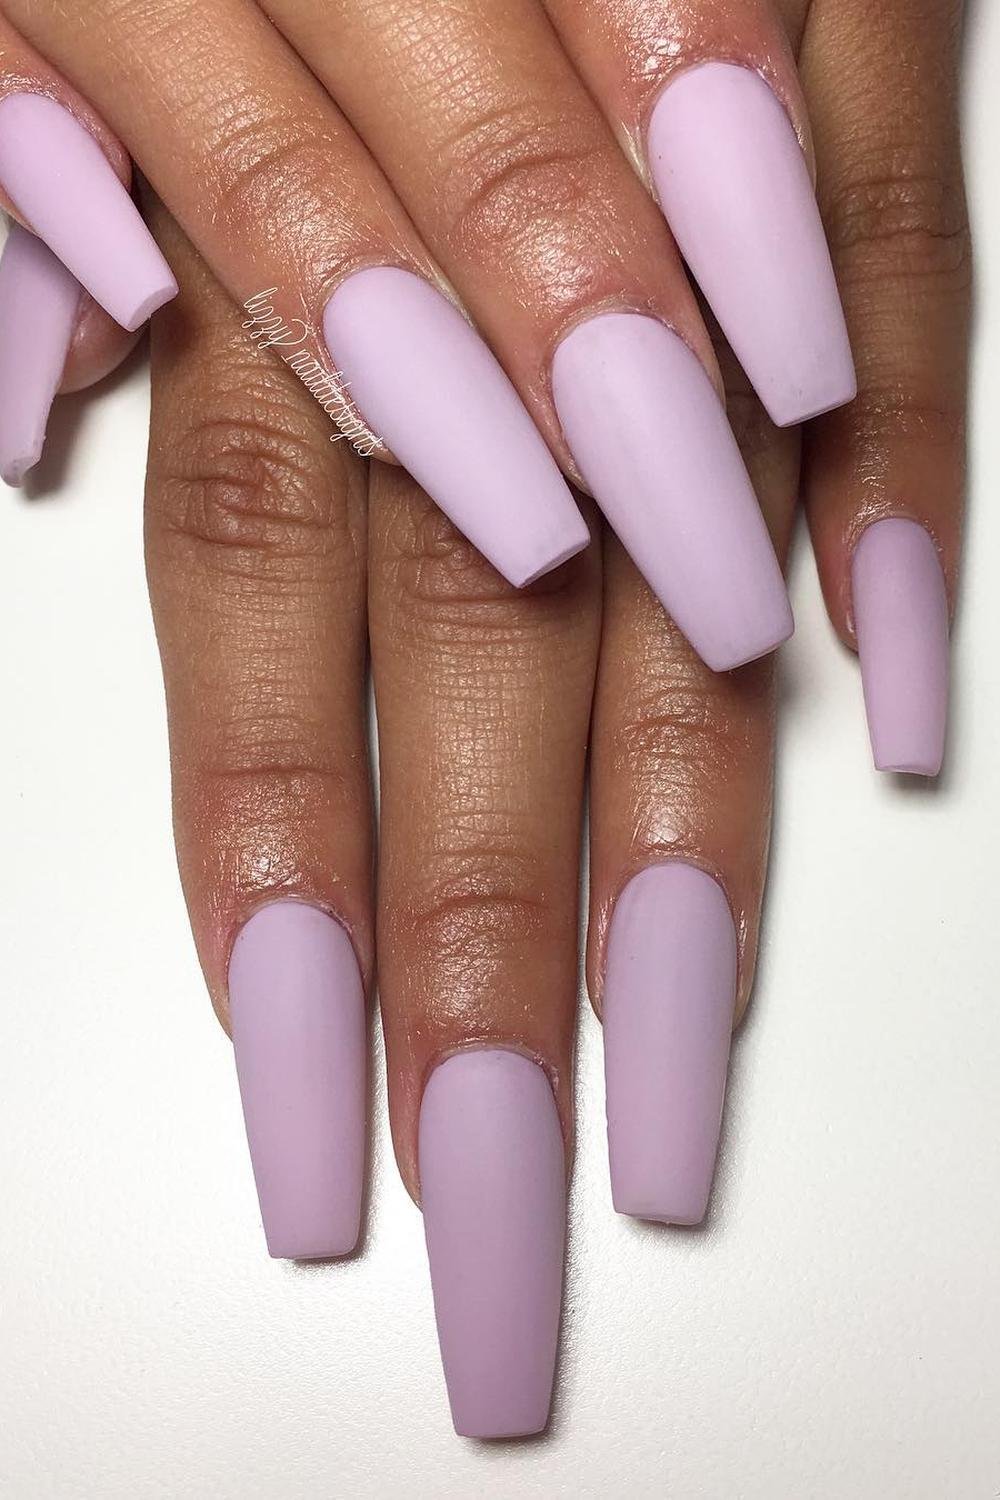 35 - Picture of Purple Nails